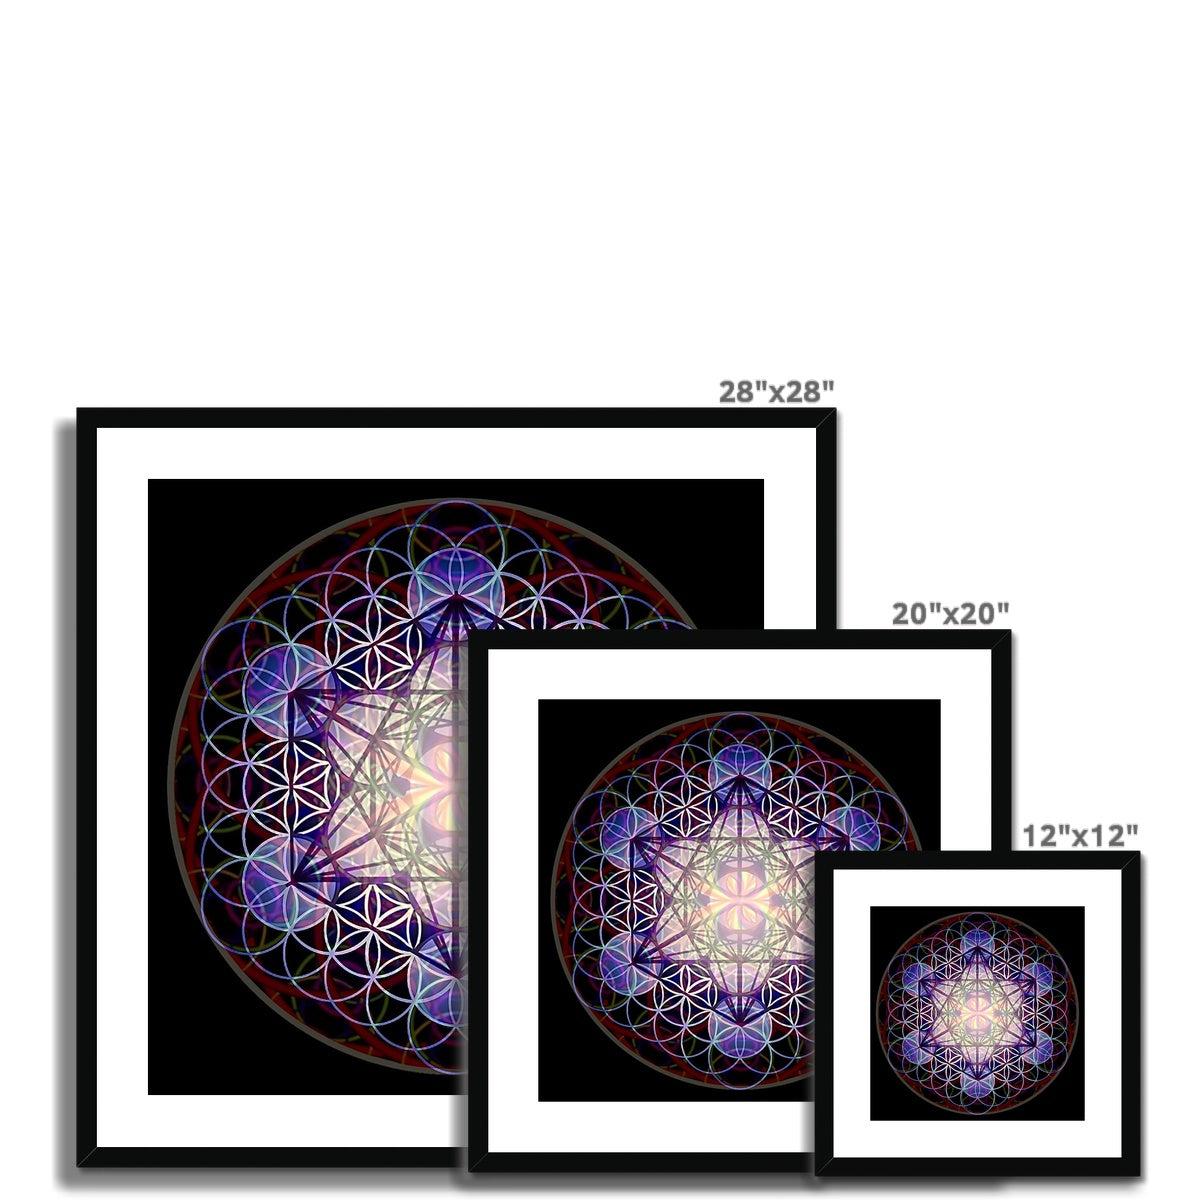 The Metatron's Cube with inverted Sound waves Framed & Mounted Print